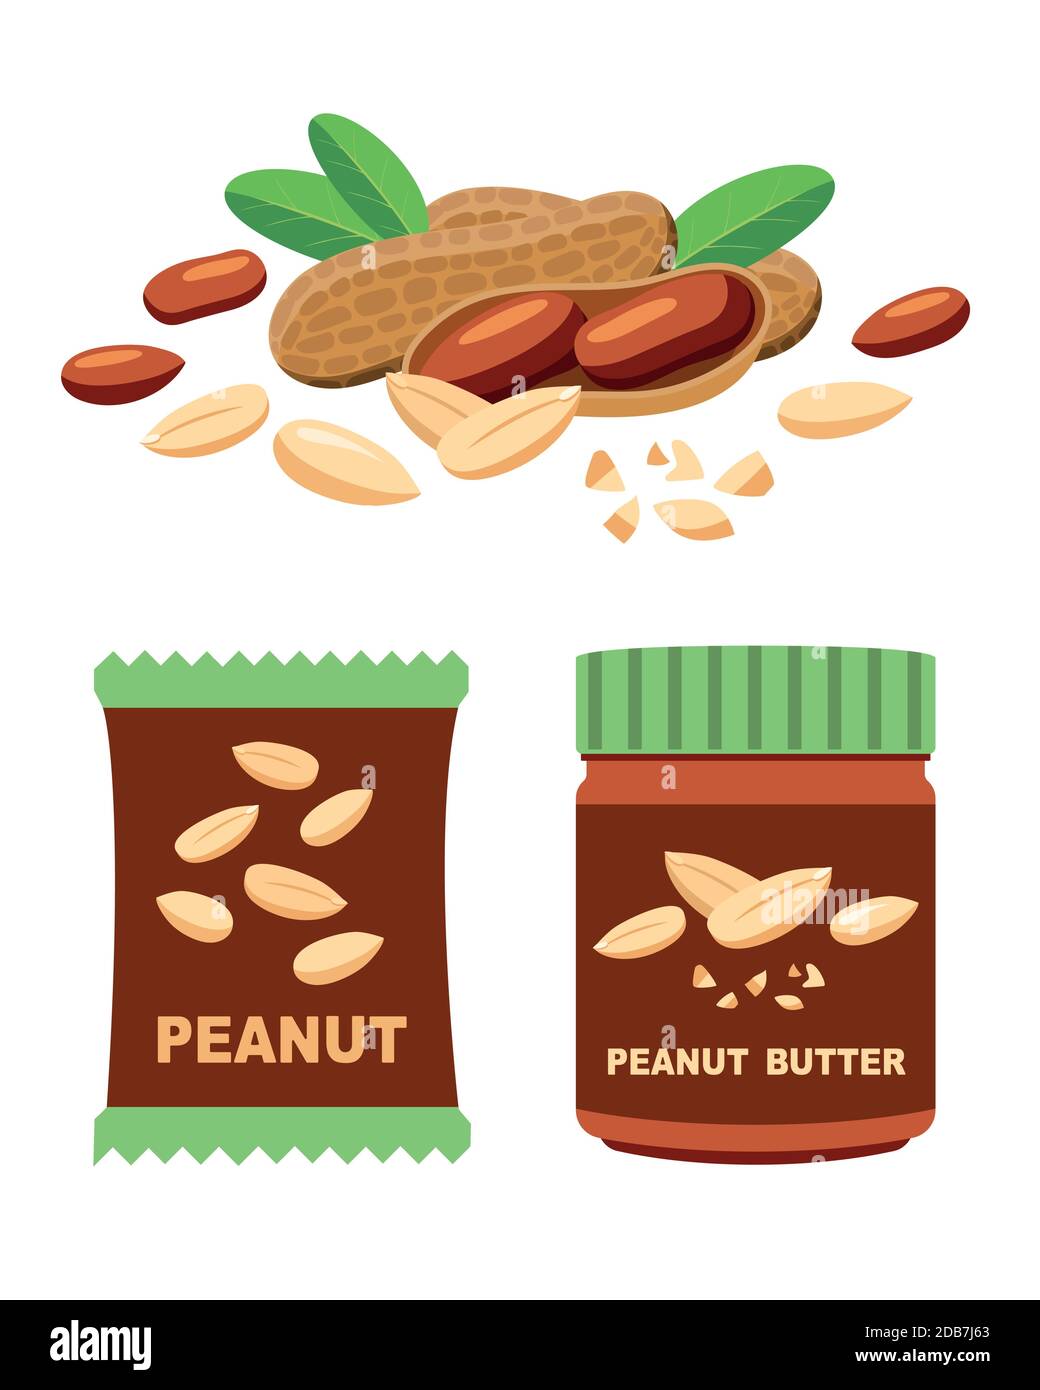 Peanuts and products, pasta and nuts in packaging Stock Vector